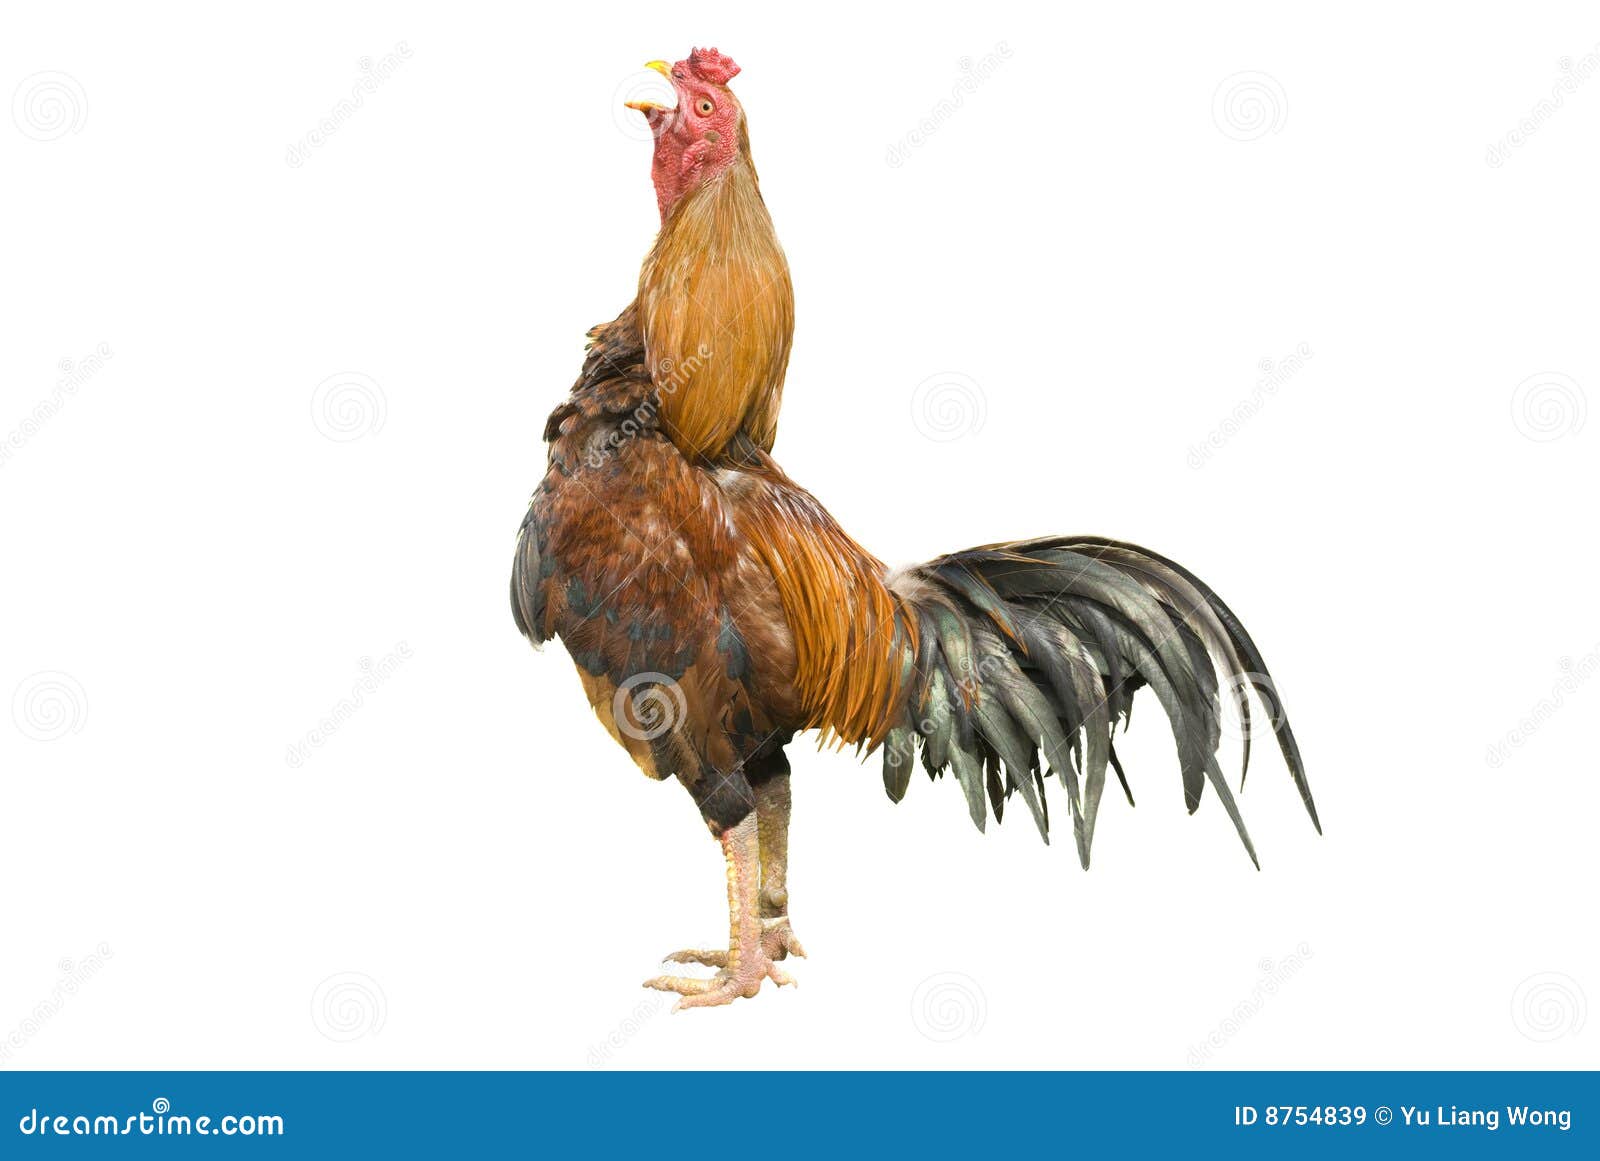 clipart rooster crowing - photo #40